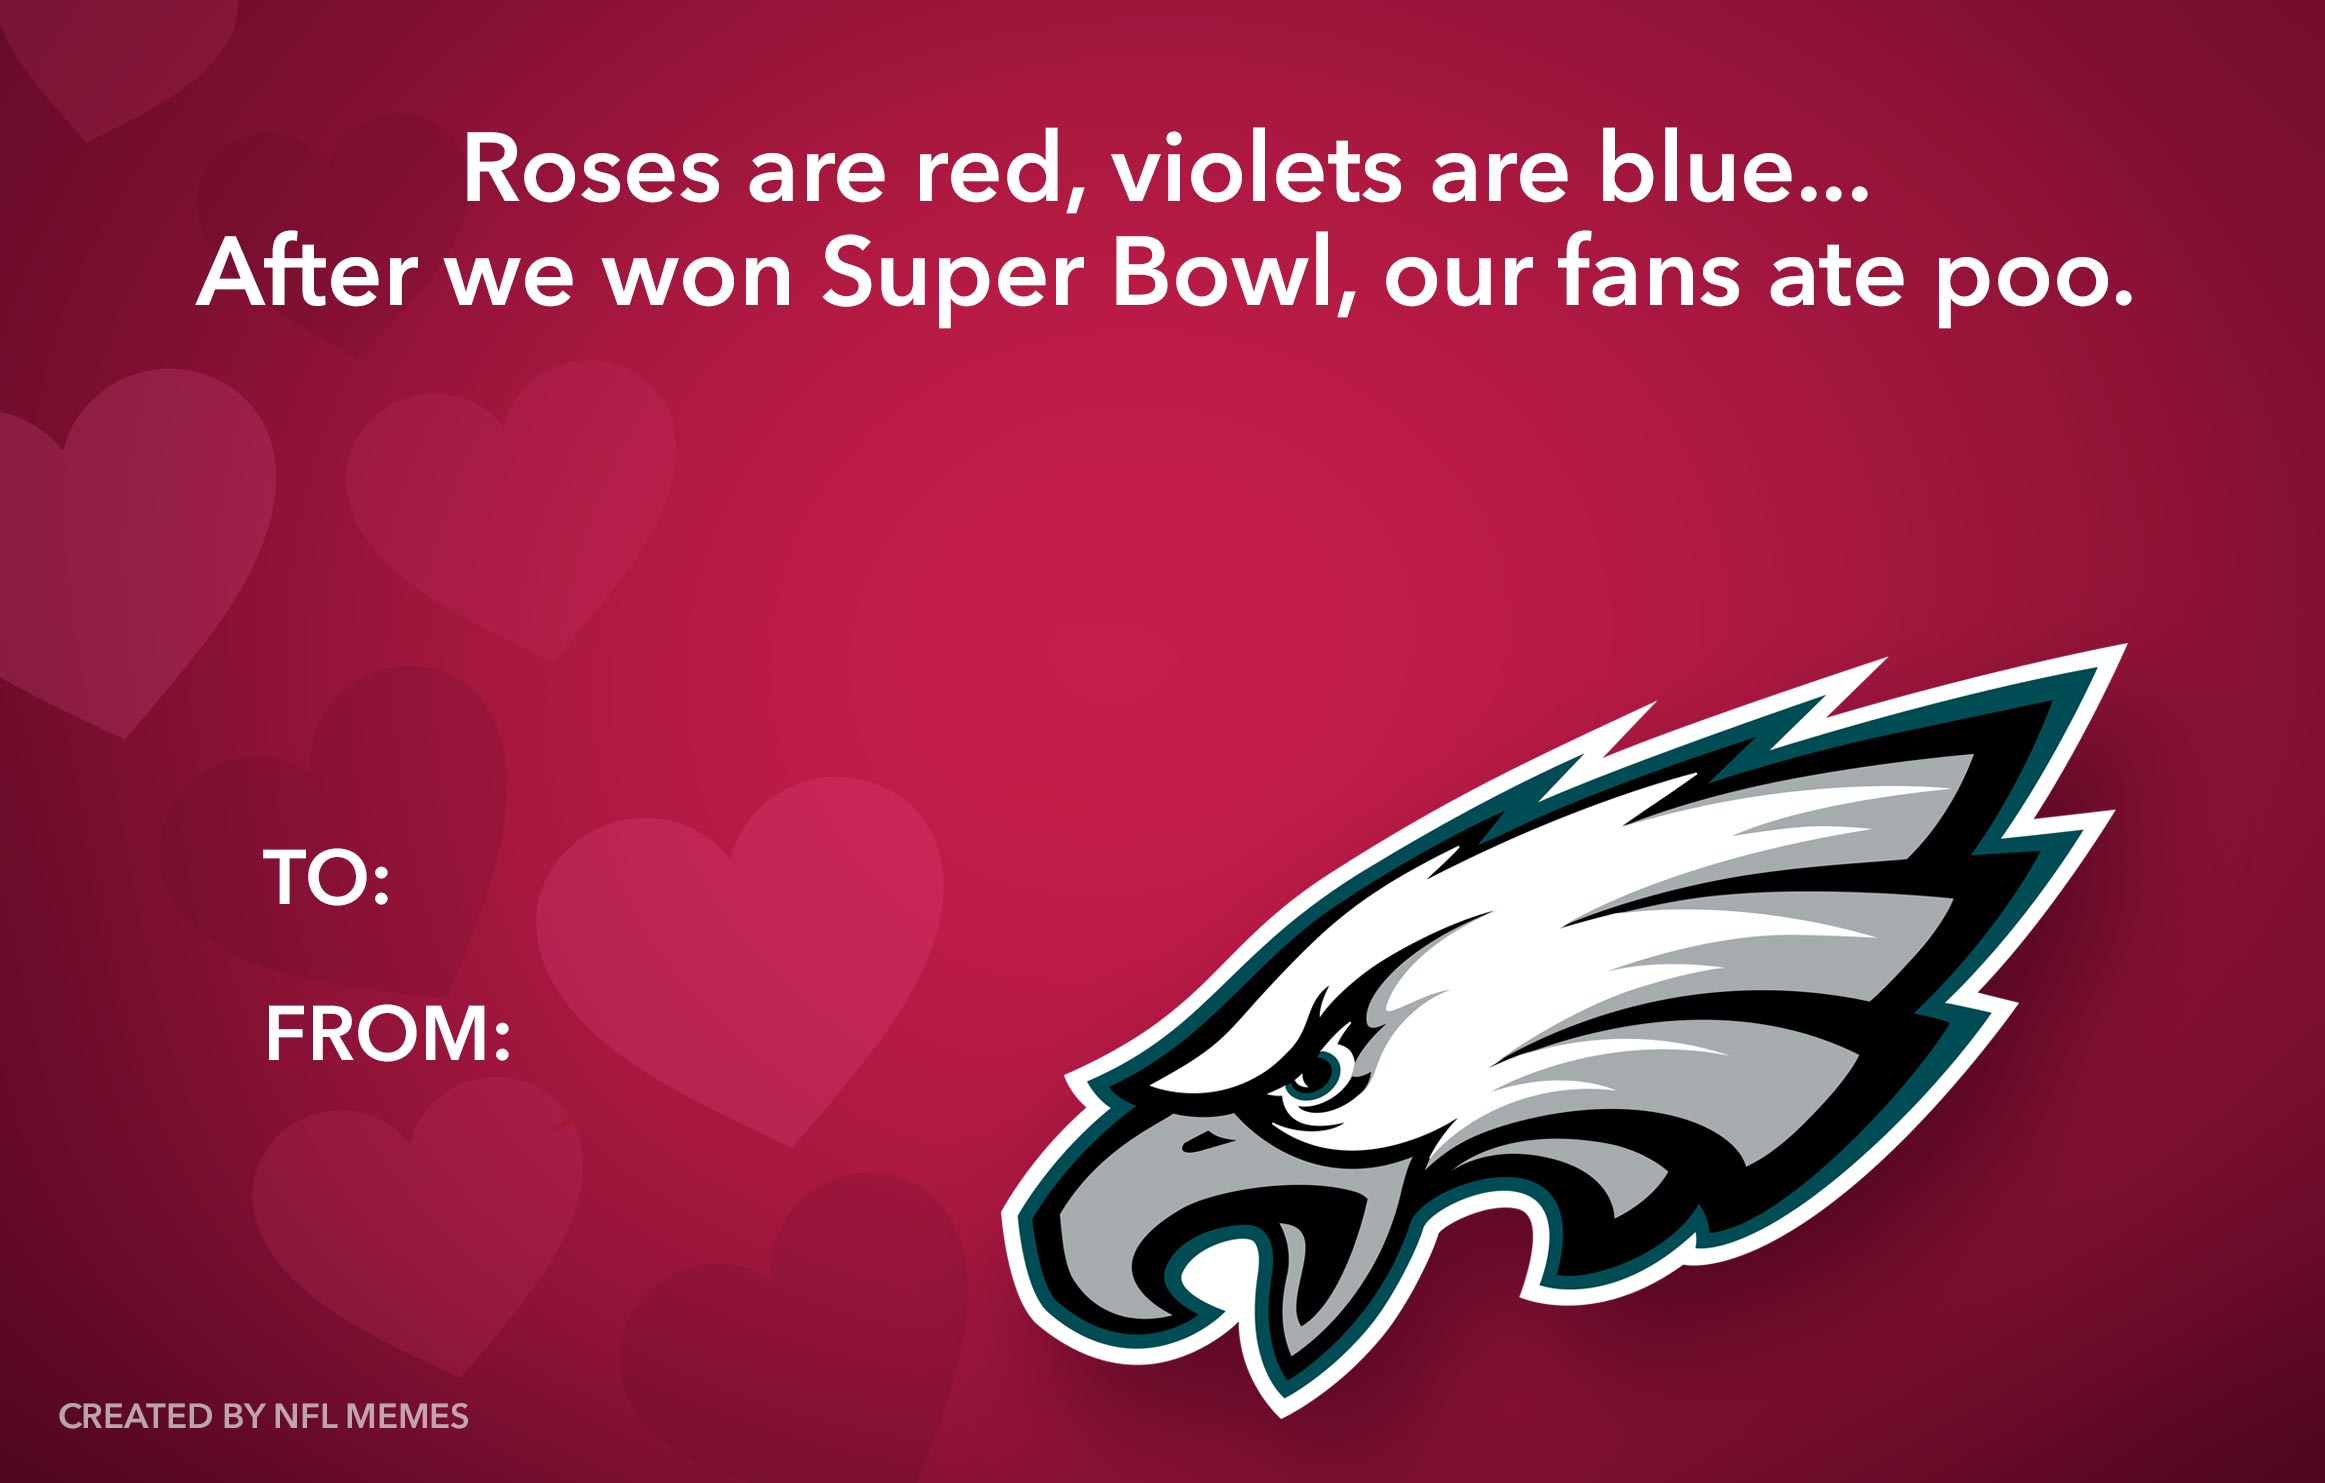 Here’s This Year’s Batch Of Hilarious NFLThemed Valentine’s Day Cards